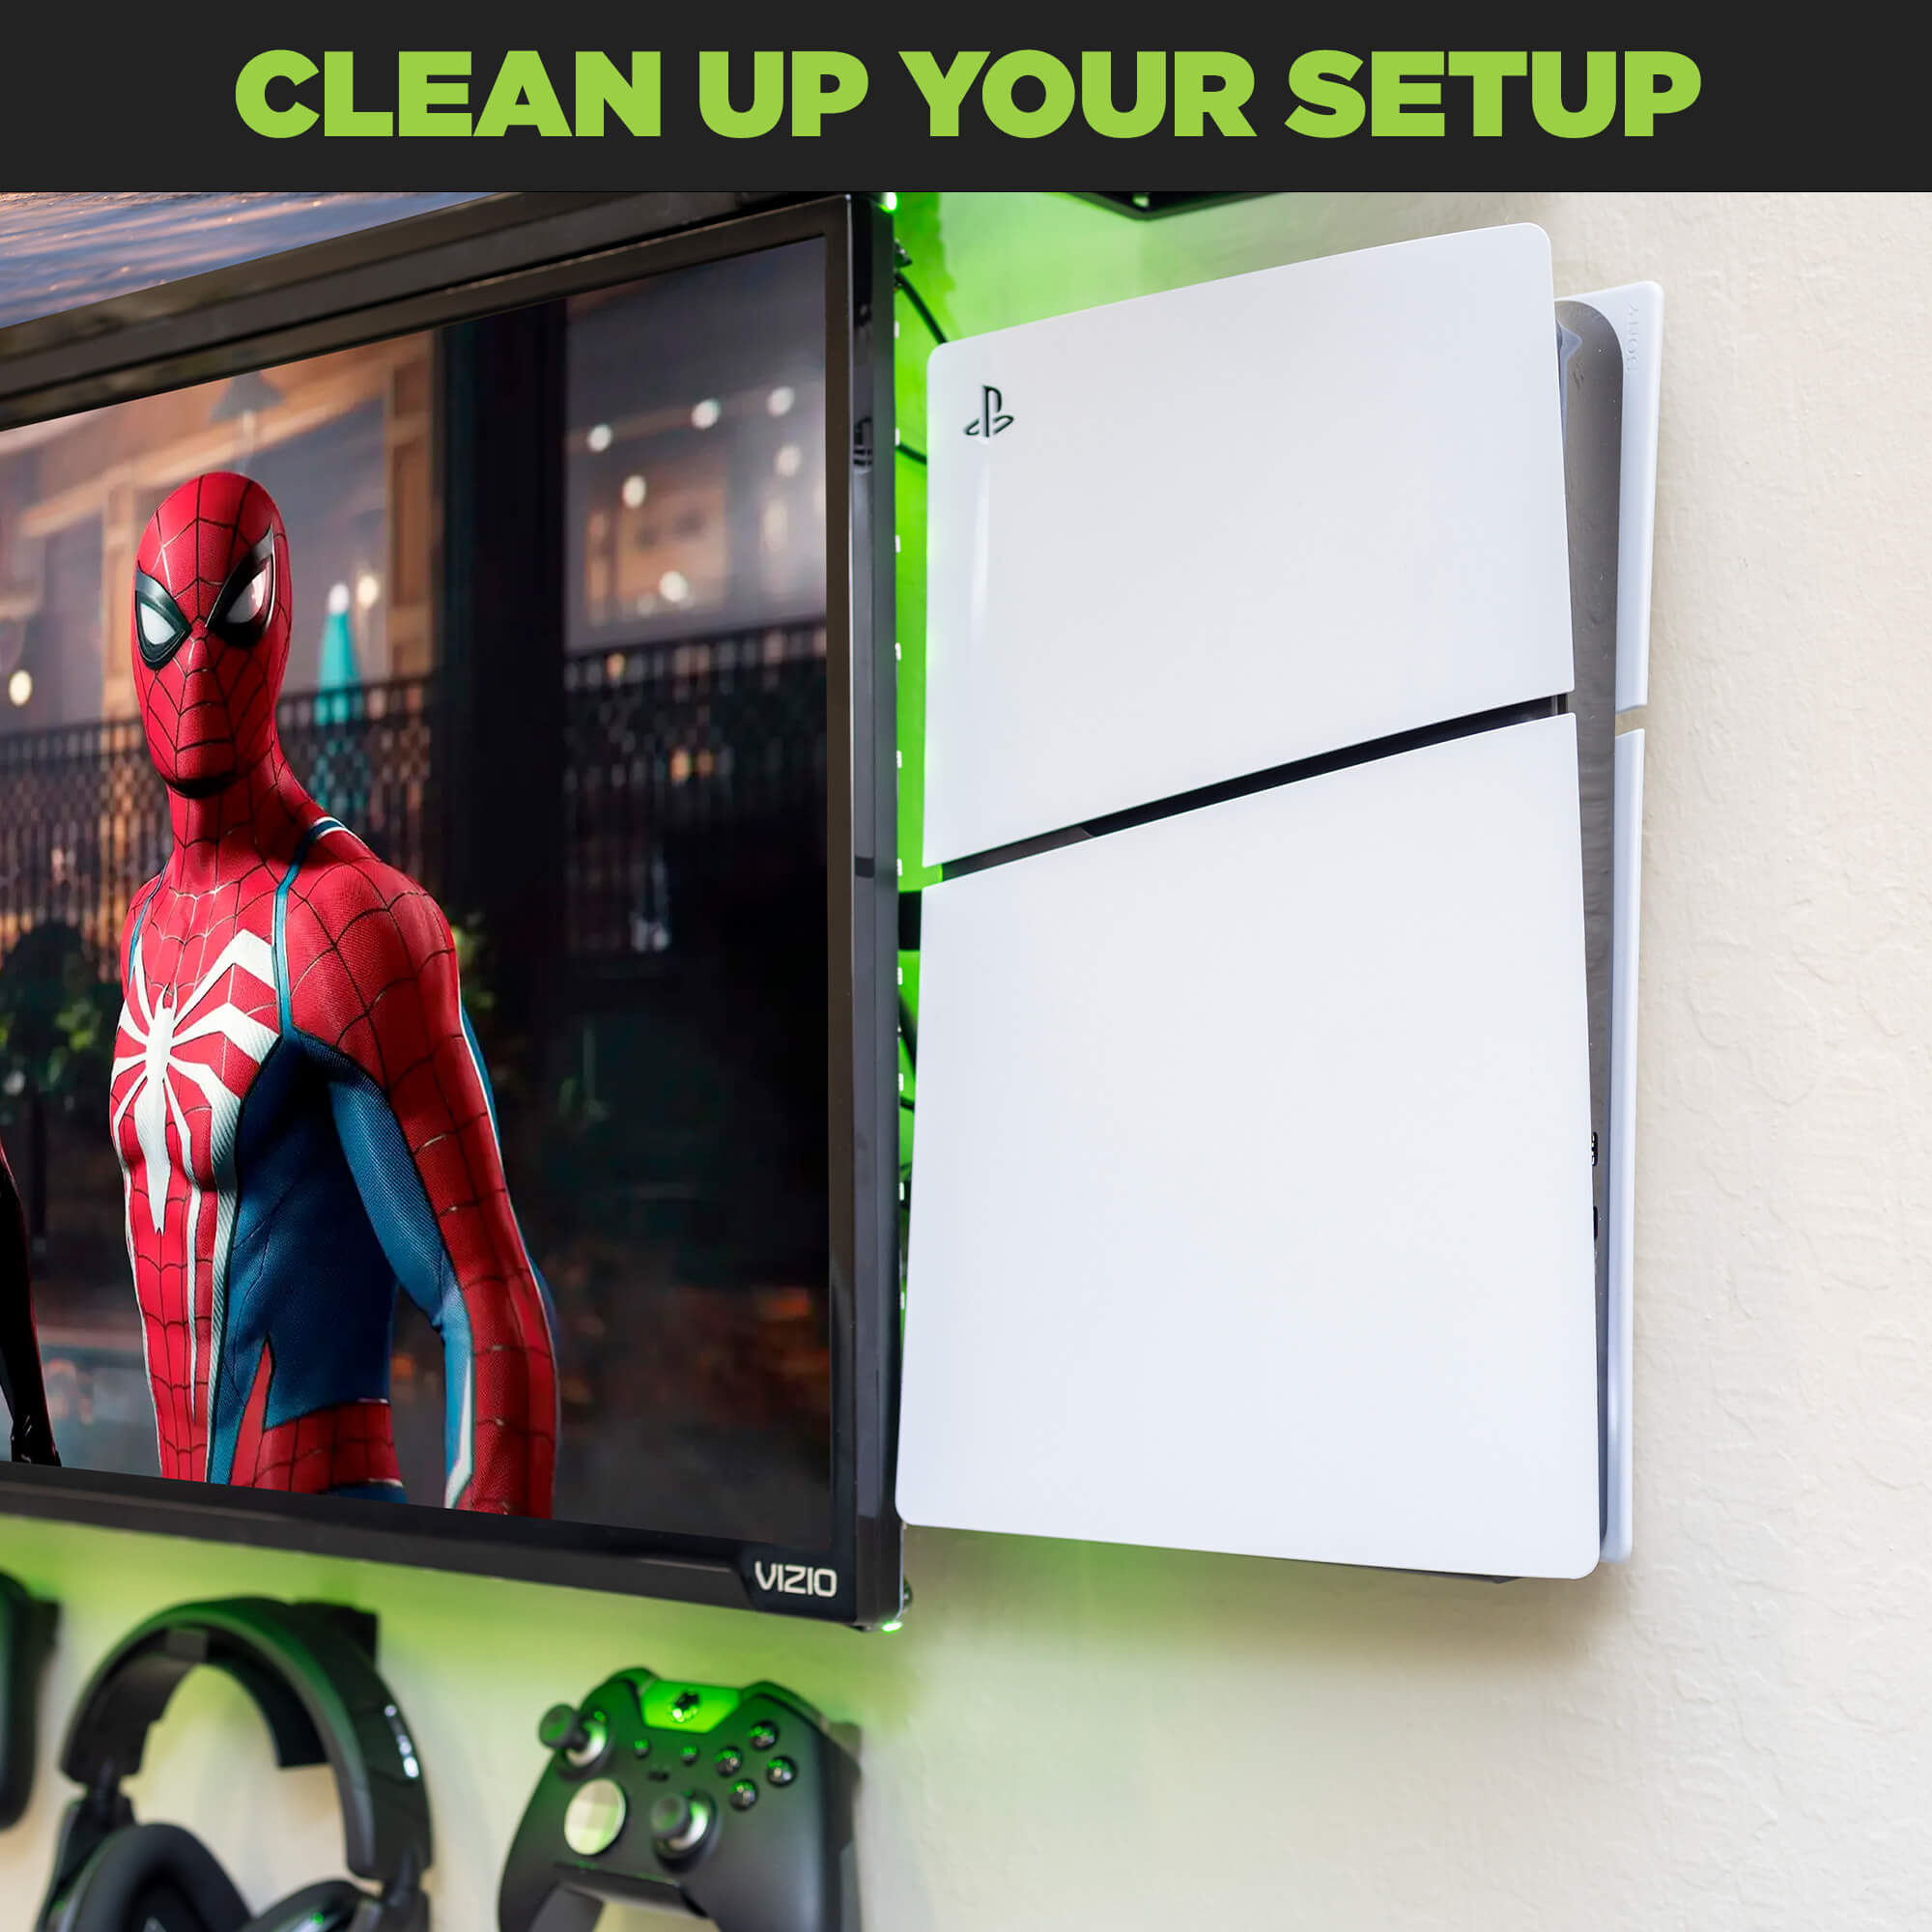  Clean up your gaming setup with the HIDEit Wall Mount designed for the PS5 Slim consoles.